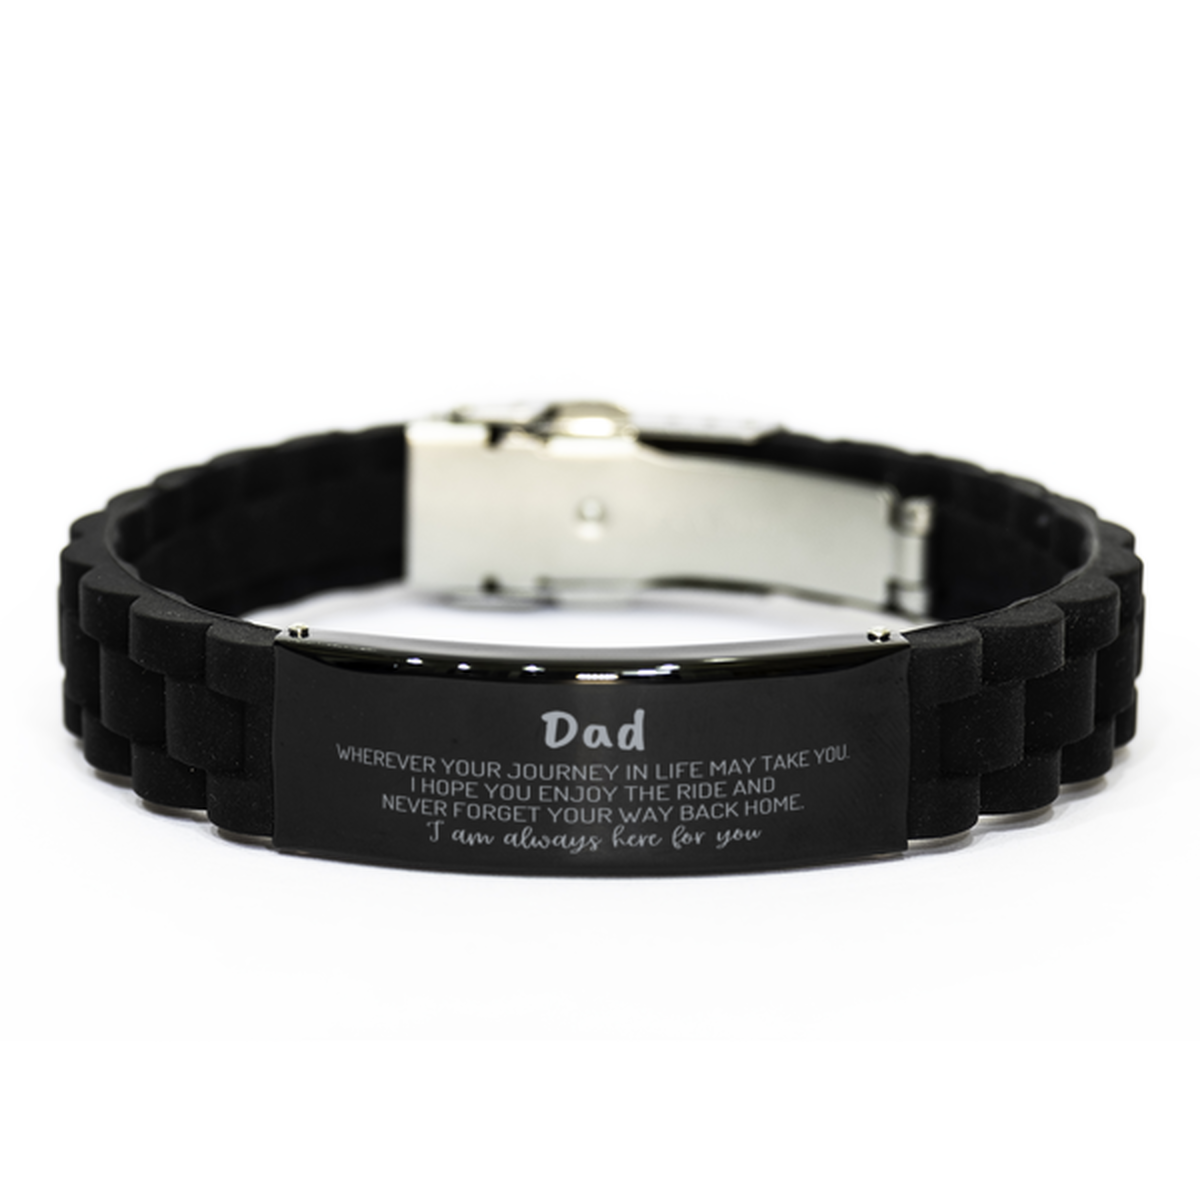 Dad wherever your journey in life may take you, I am always here for you Dad Black Glidelock Clasp Bracelet, Awesome Christmas Gifts For Dad, Dad Birthday Gifts for Men Women Family Loved One